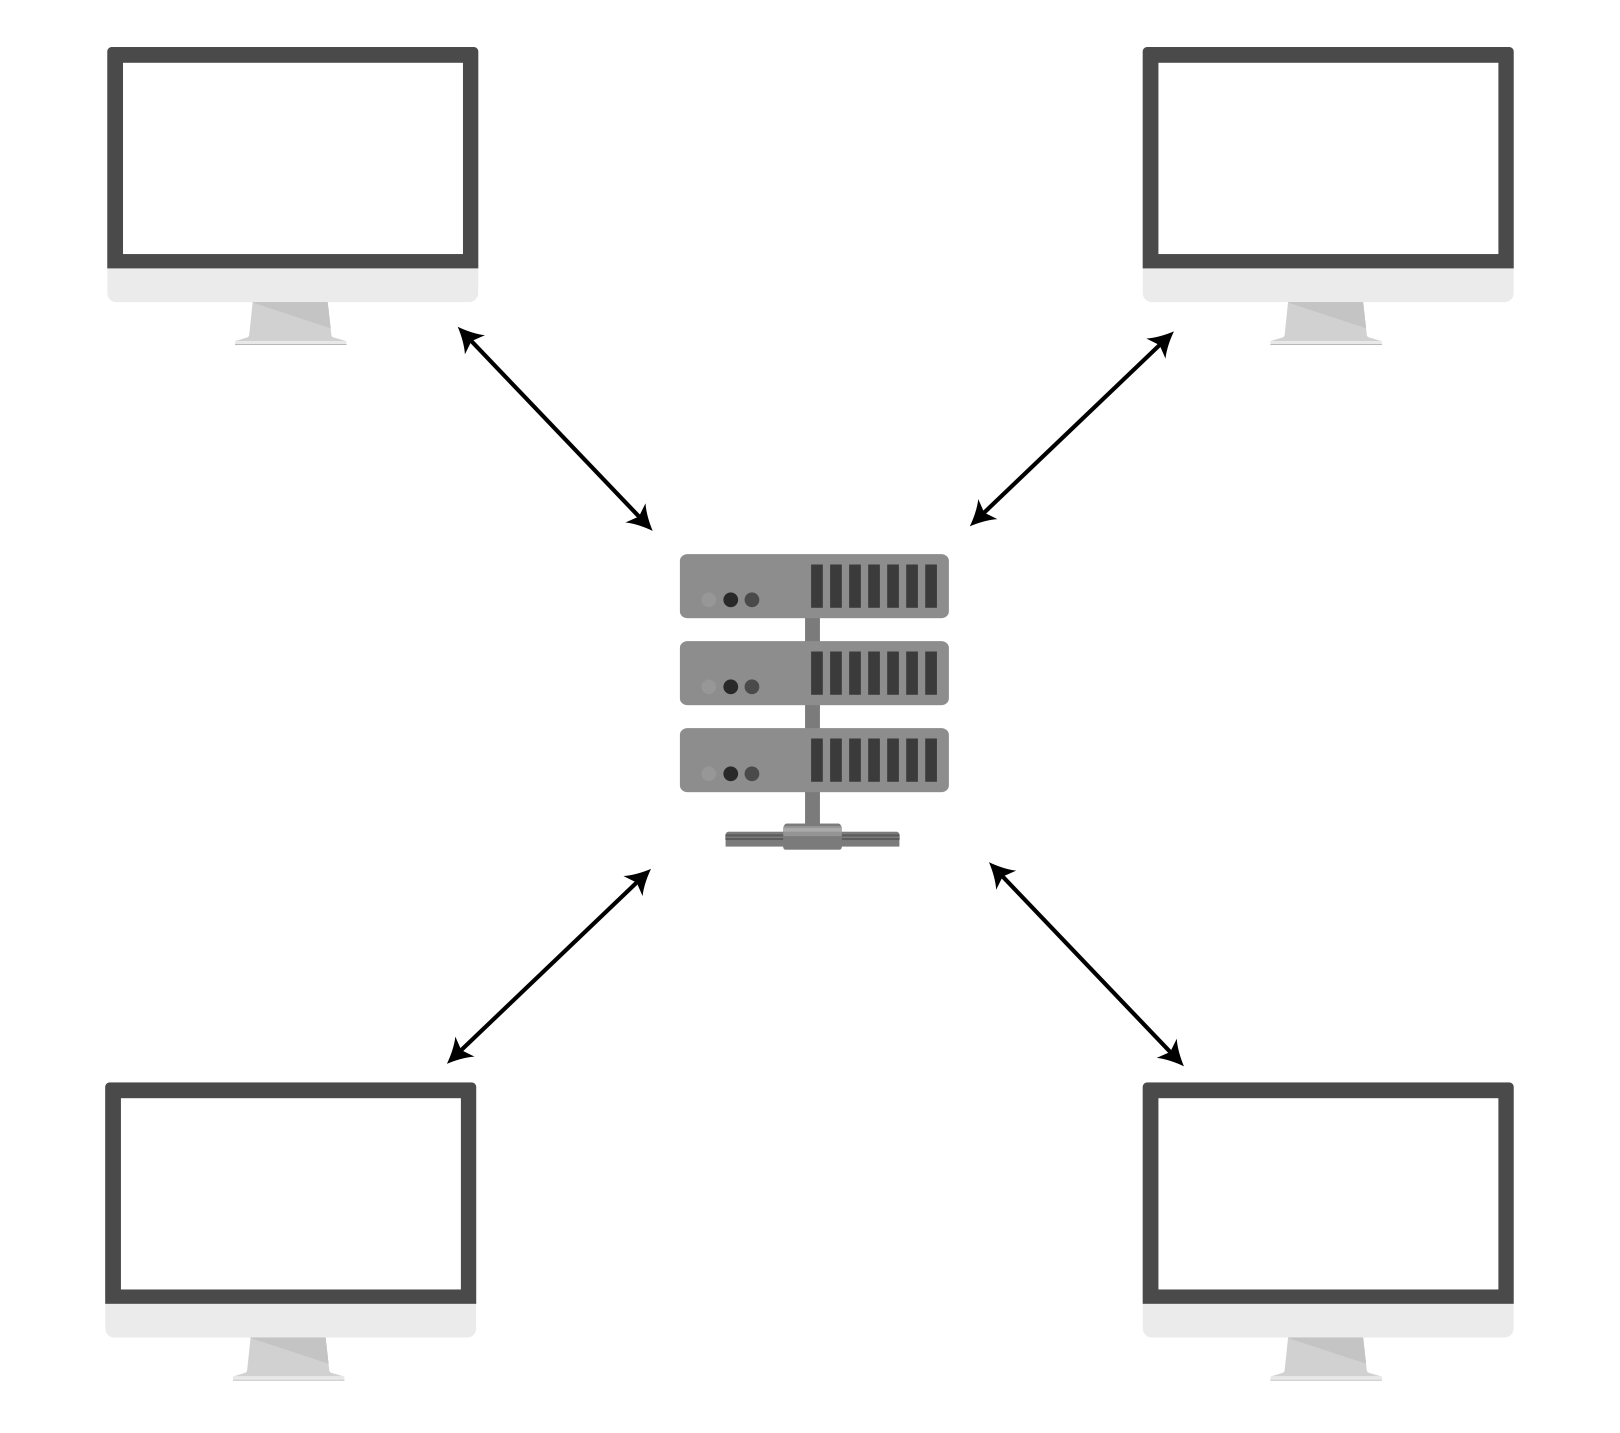 A typical client-server relationship: the server in the center retrieves and sends back data from 4 computers.